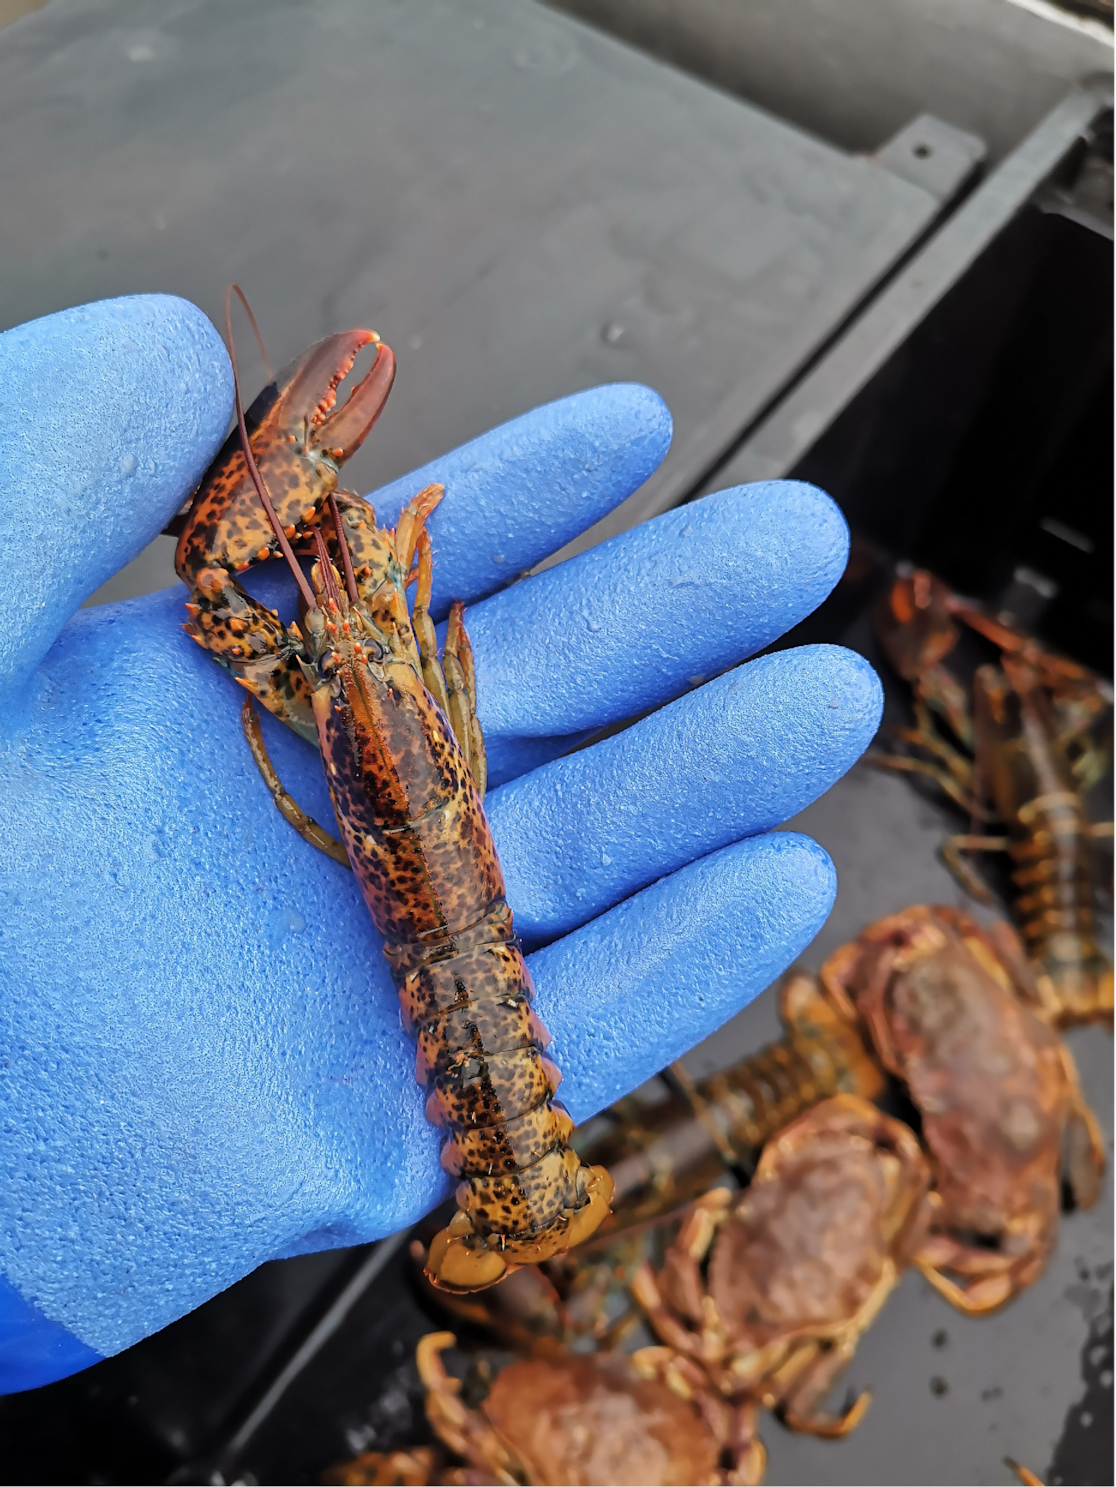 New trap tags for commercial lobster and crab traps starting Jan. 1